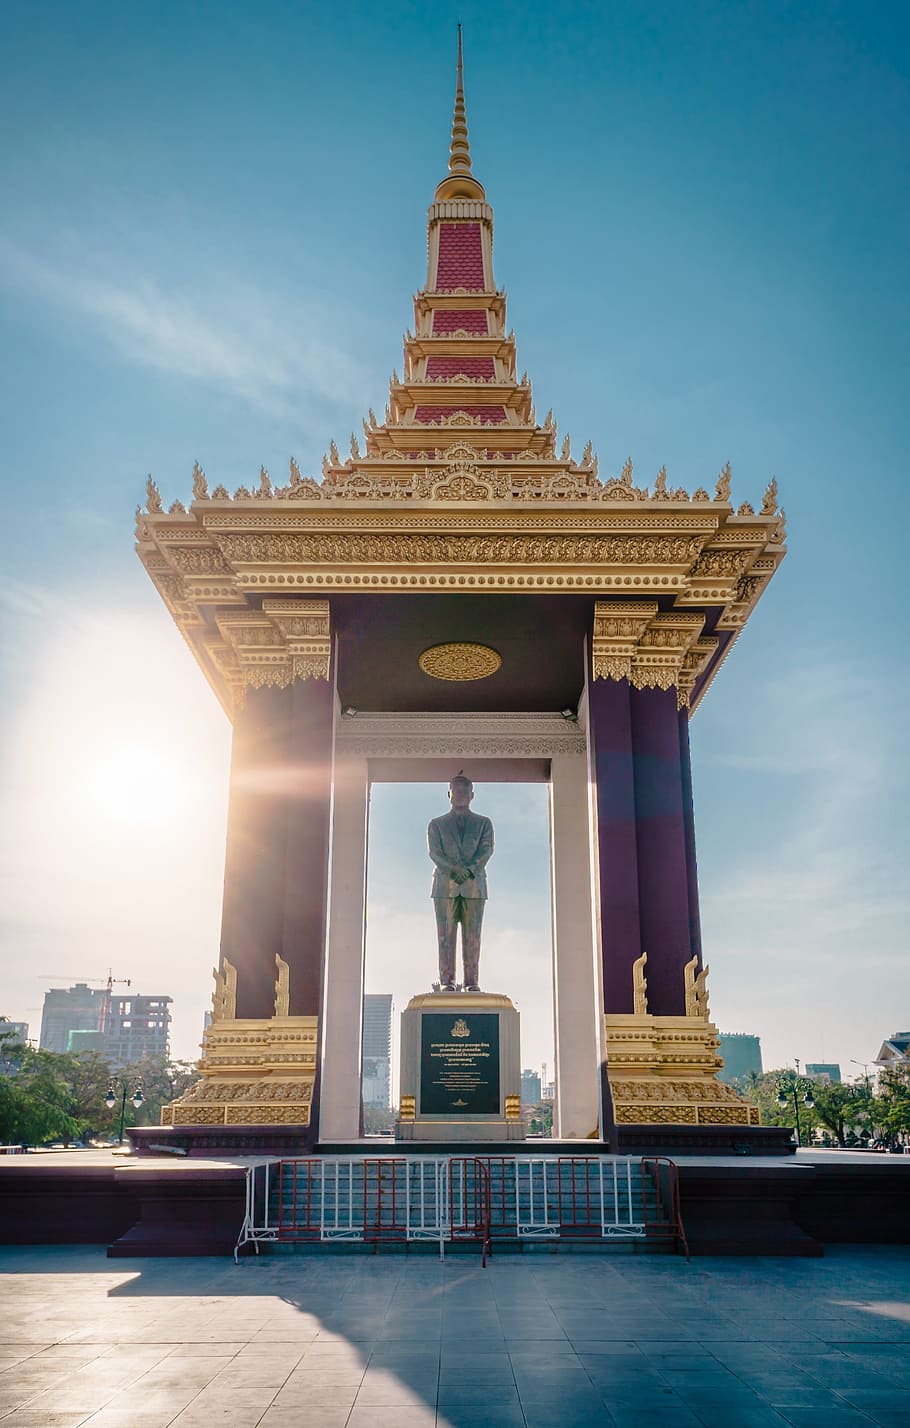 cambodia, phnom penh, Cambodia, Phnom Penh, independence square, travel, building, city, south-east asia, afternoon, sihanoukville